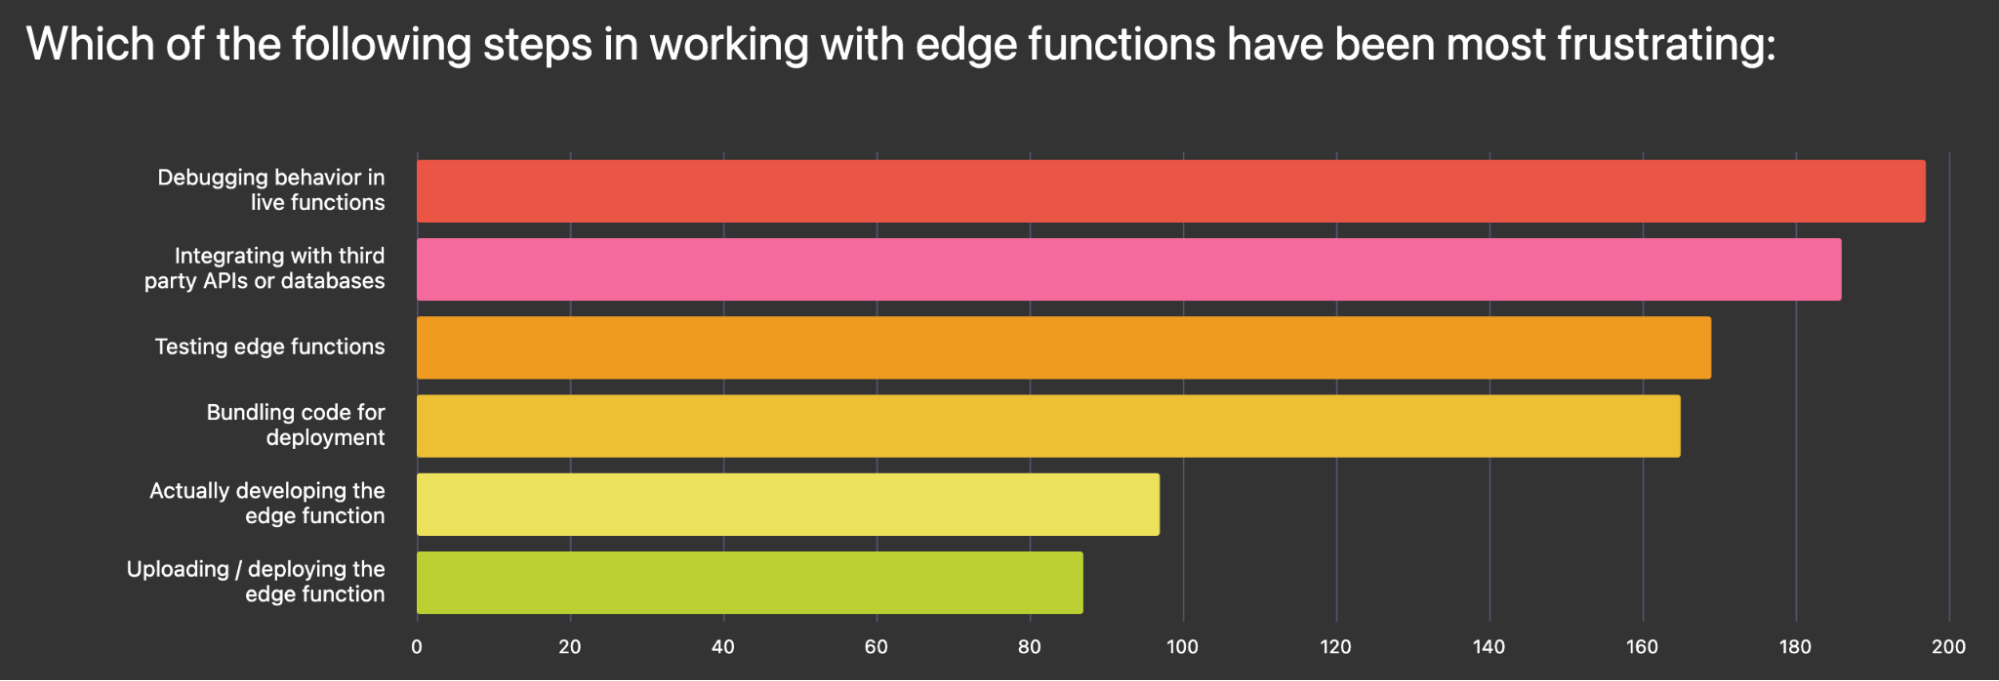 The top frustrations around edge functions revolve around debugging, testing, and observability